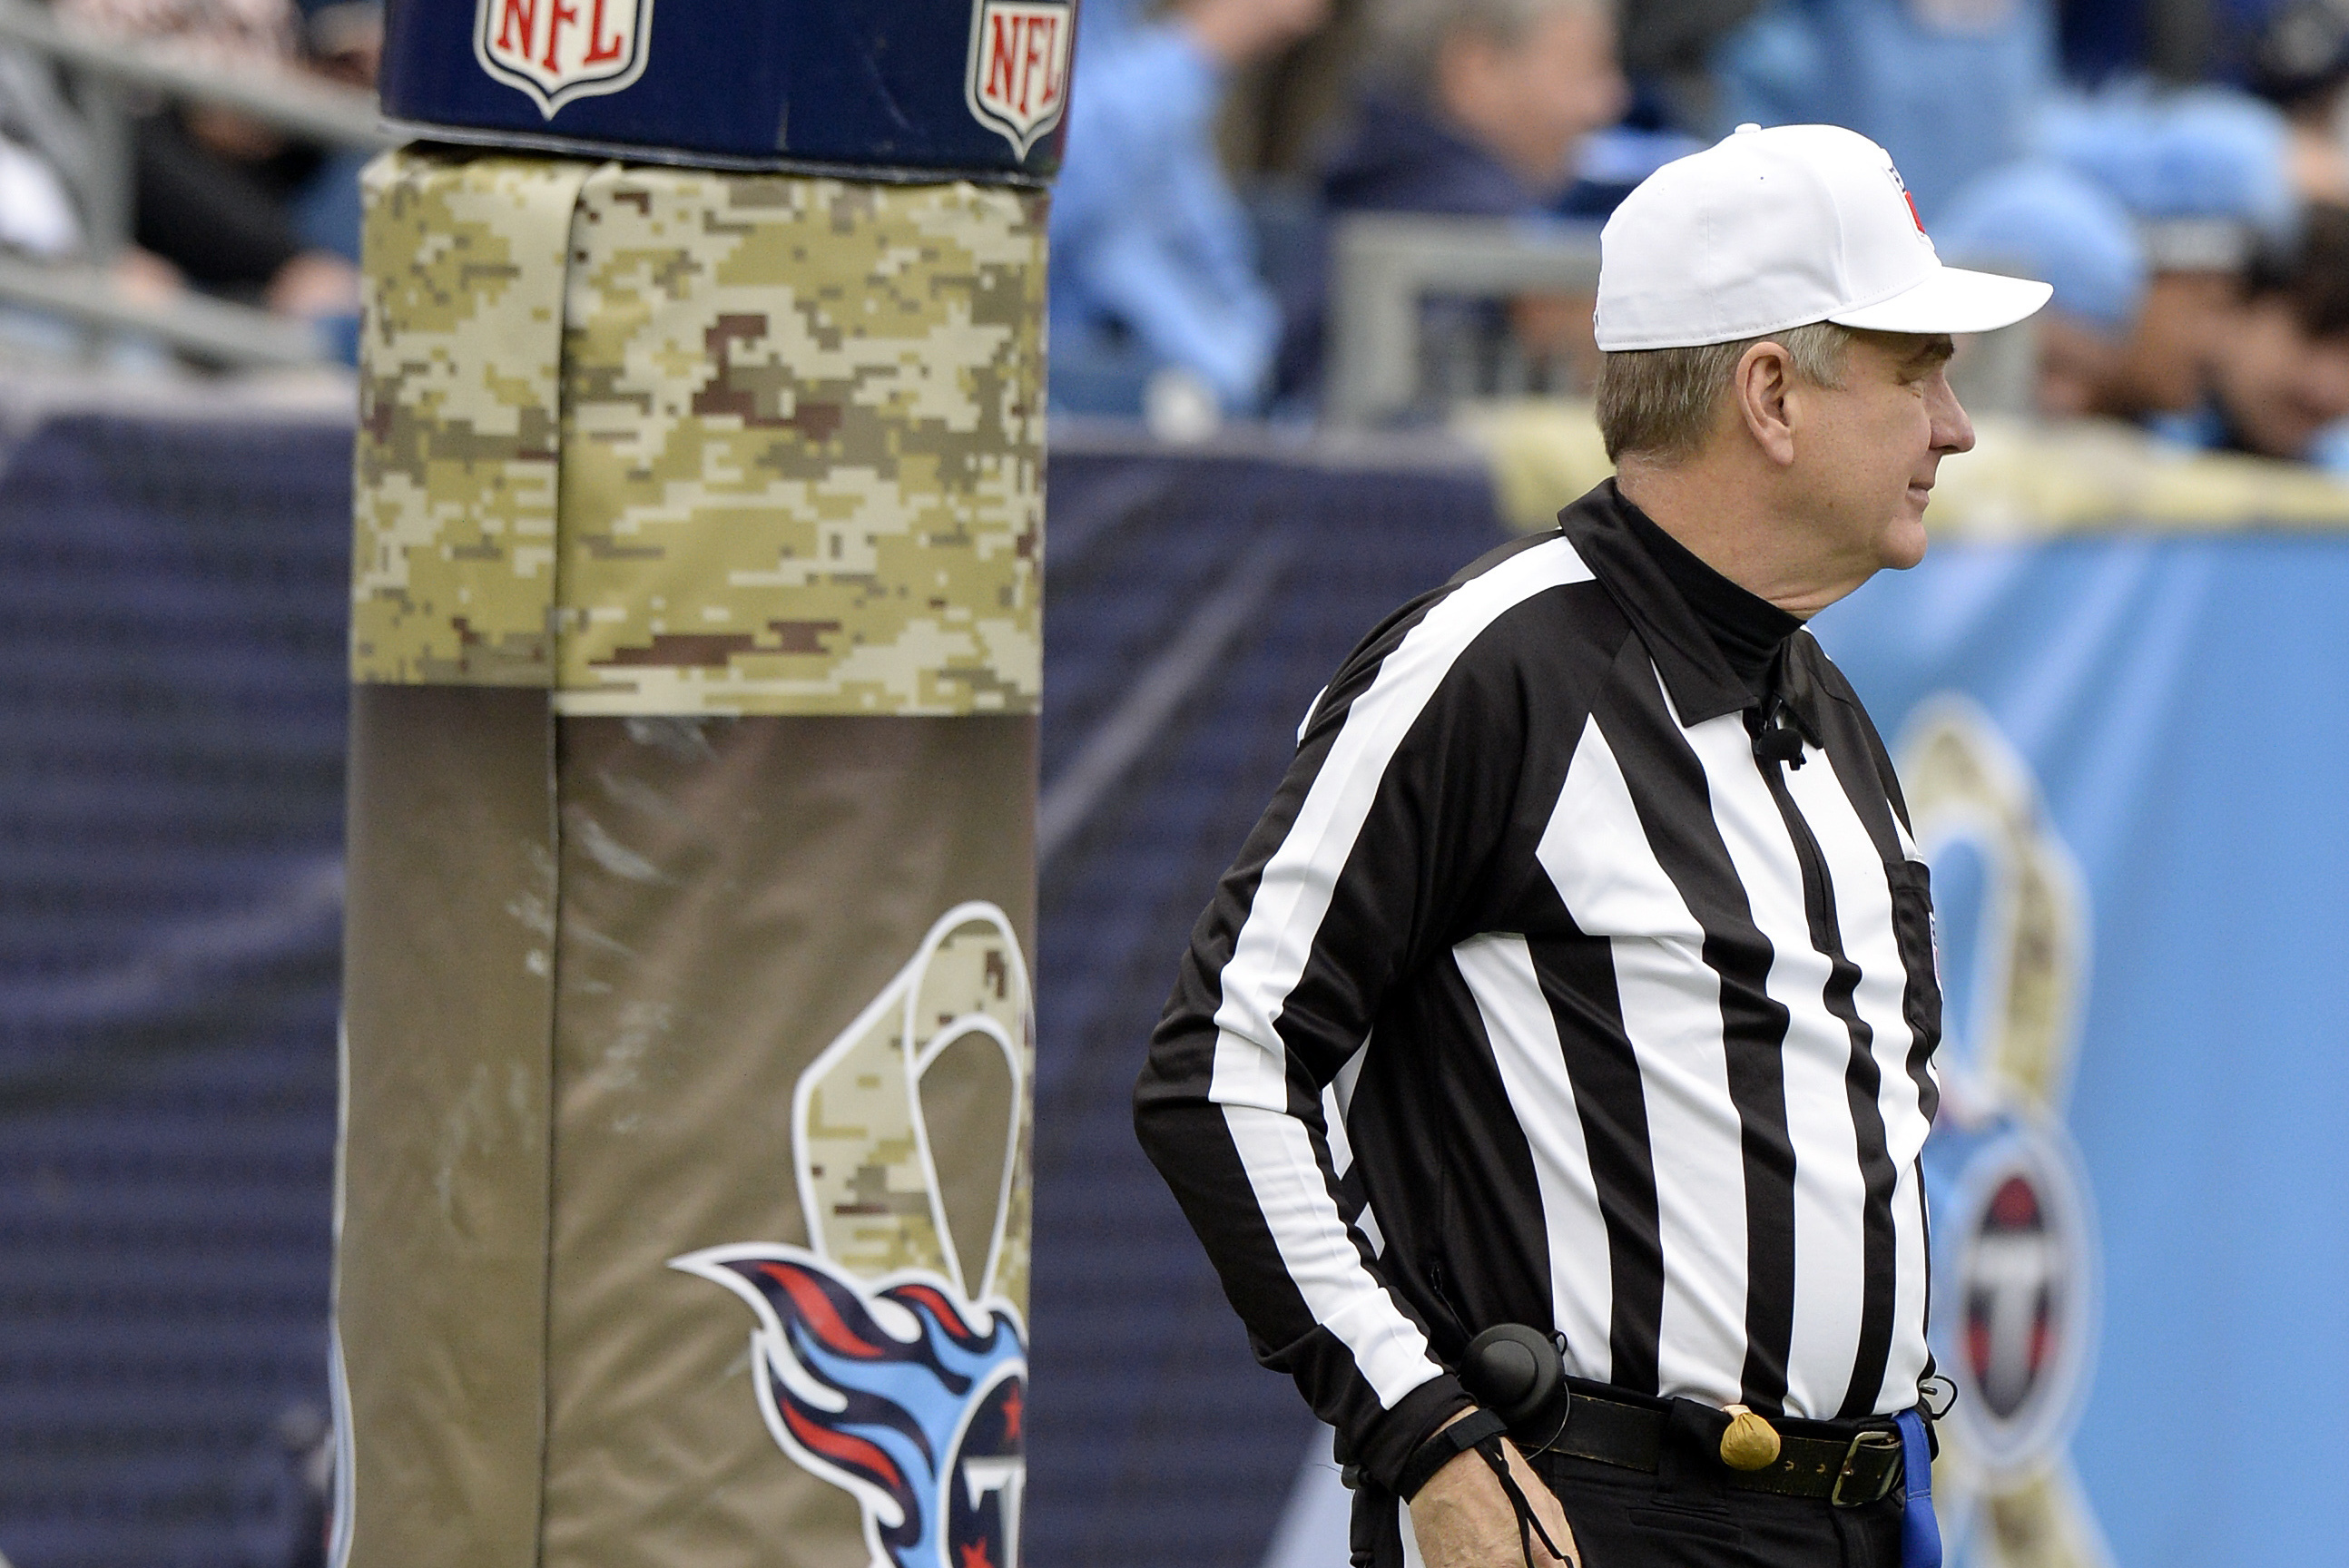 NFL replay official dies hours after working Titans, Chiefs game Sunday